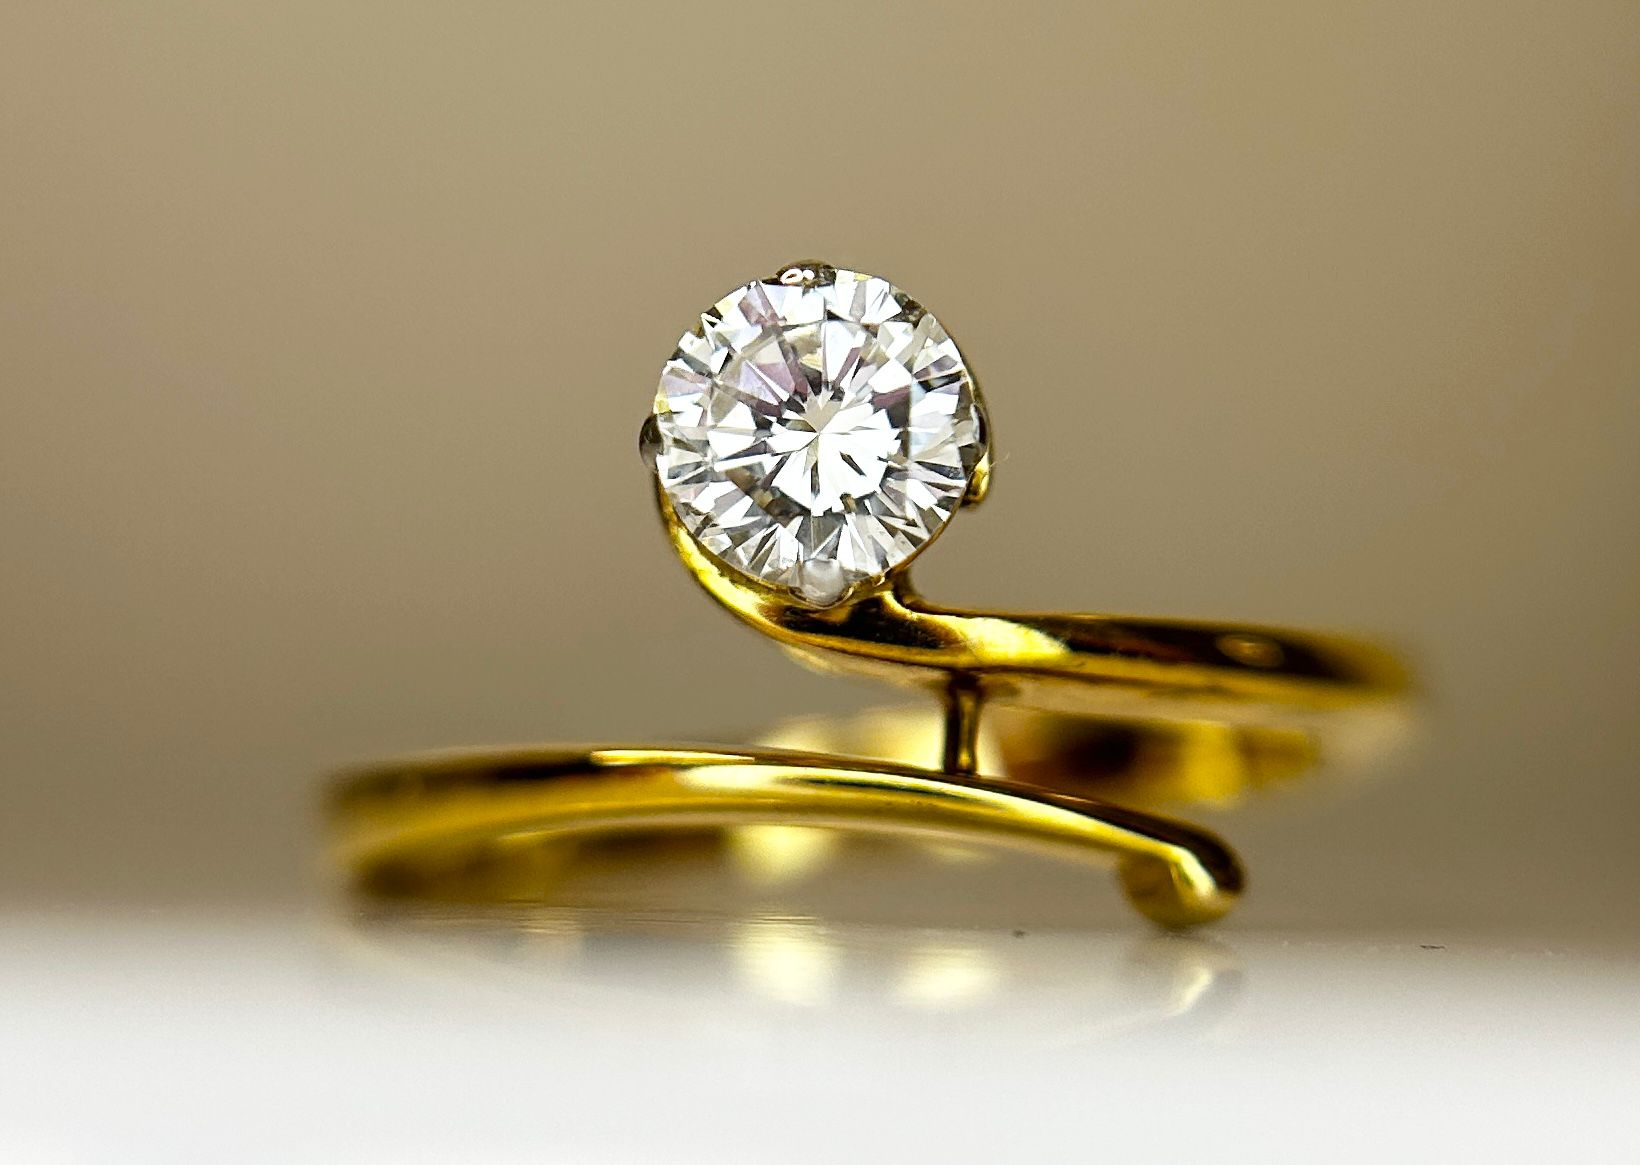 Beautiful Natural 0.30 CT VVS Diamond Ring With 18k Gold - Image 5 of 6